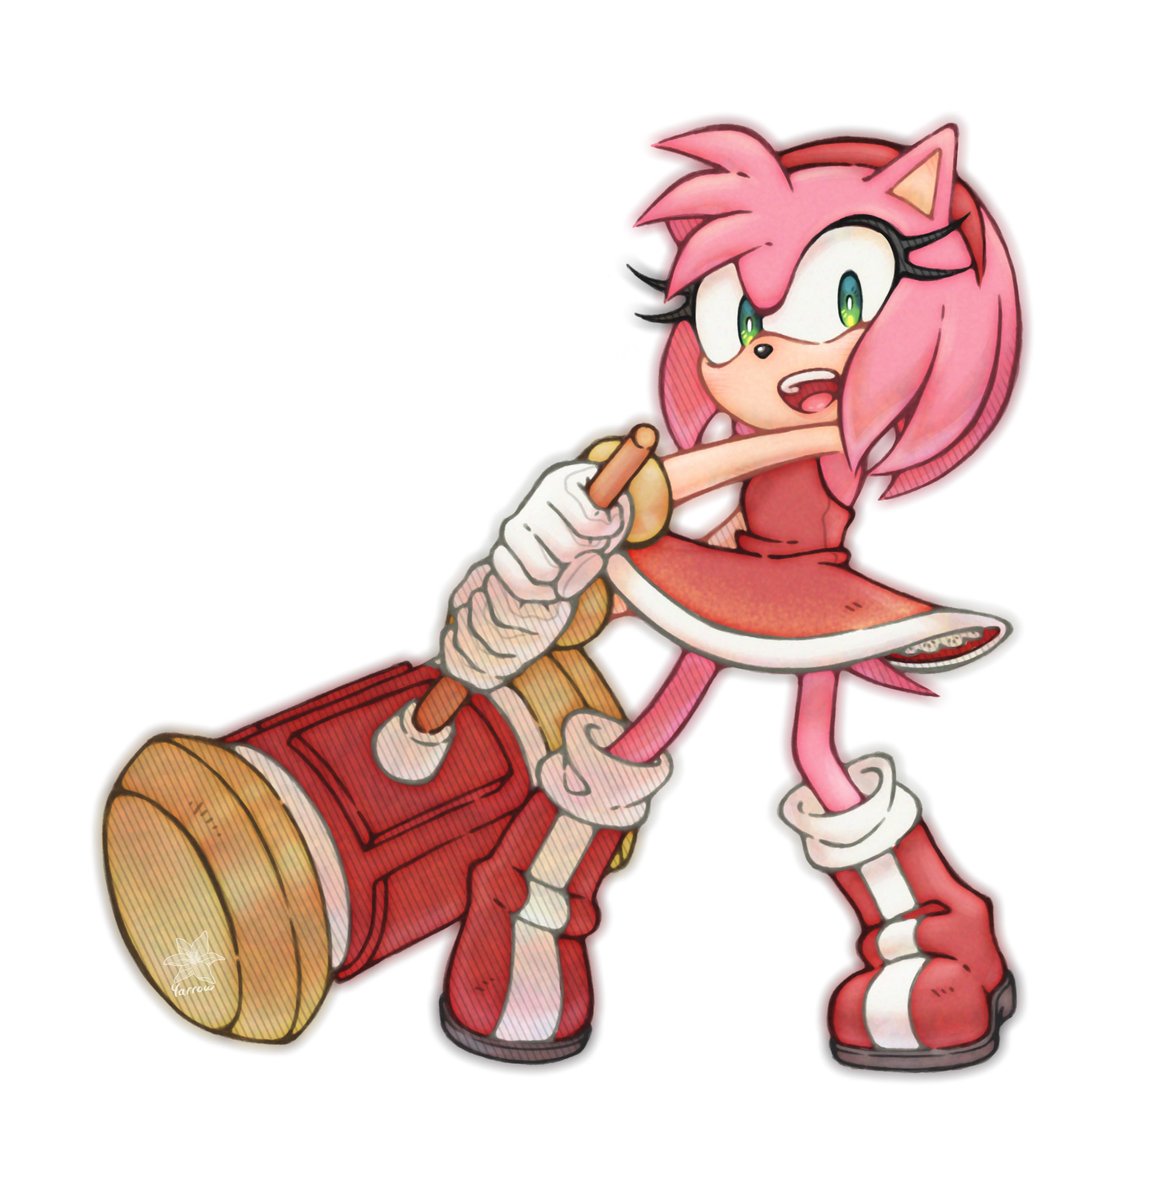 Amy Rose is here! 